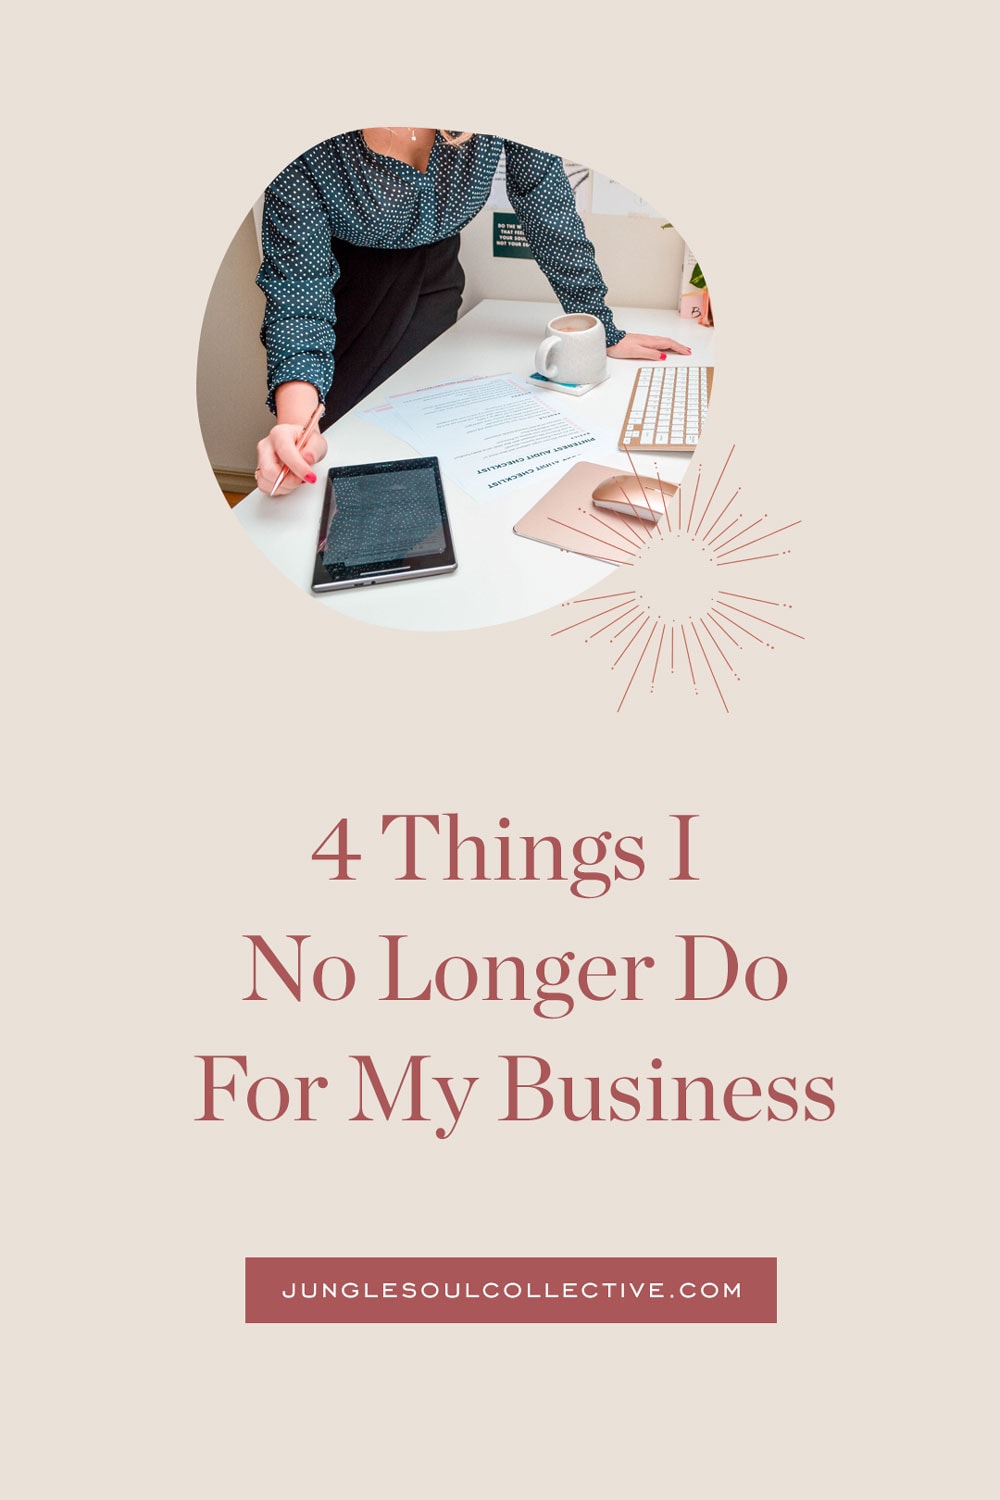 4 Things I No Longer Do for My Business